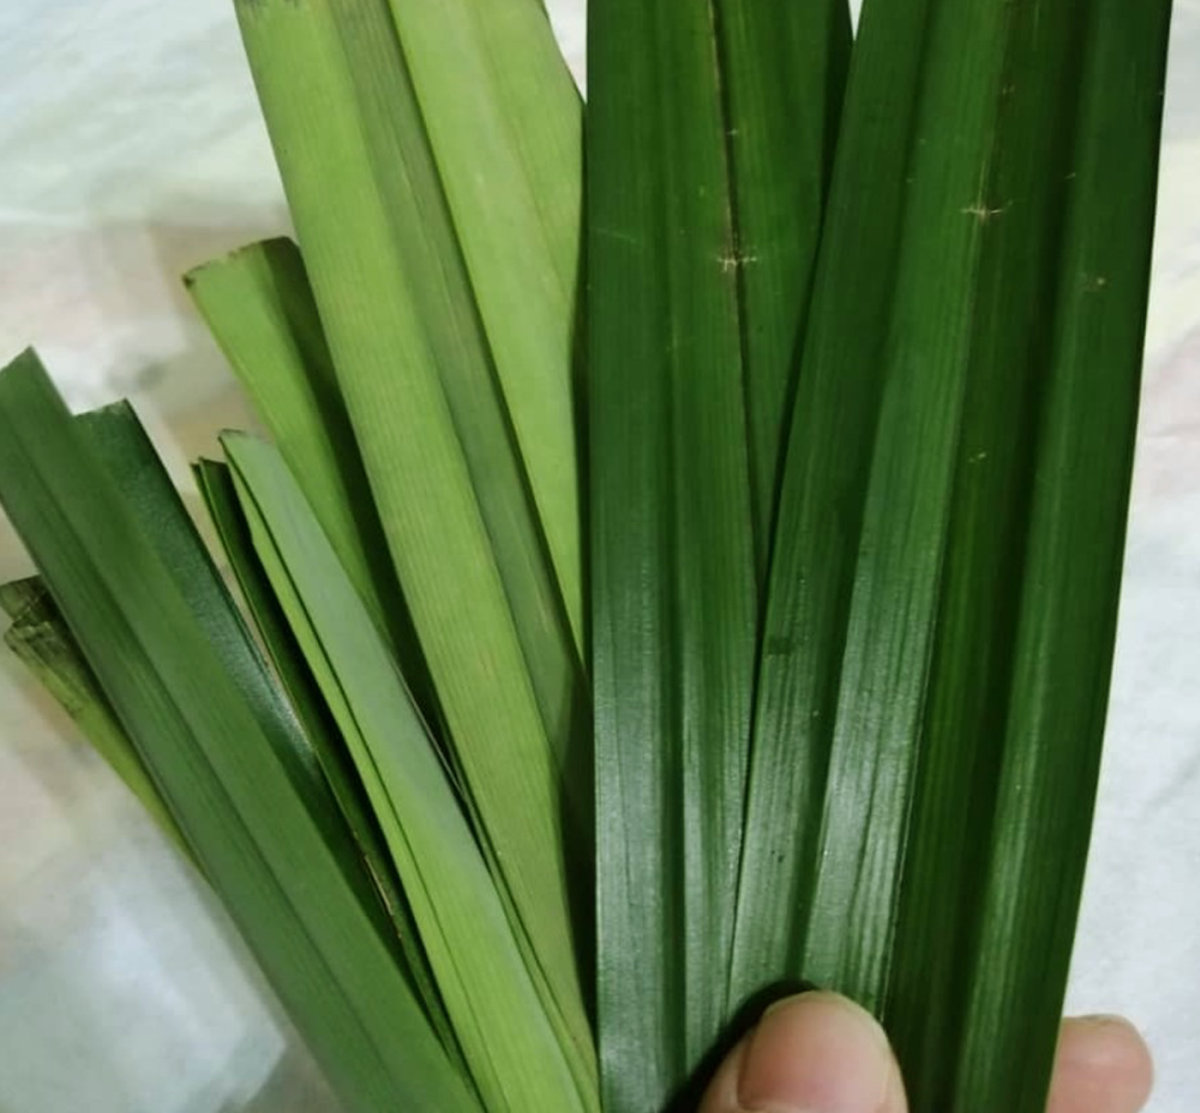 Screw pine leaf or better known as 'pandan' leaf in Malaysia. Adds a hint of fragrance to the coconut oil infused rice